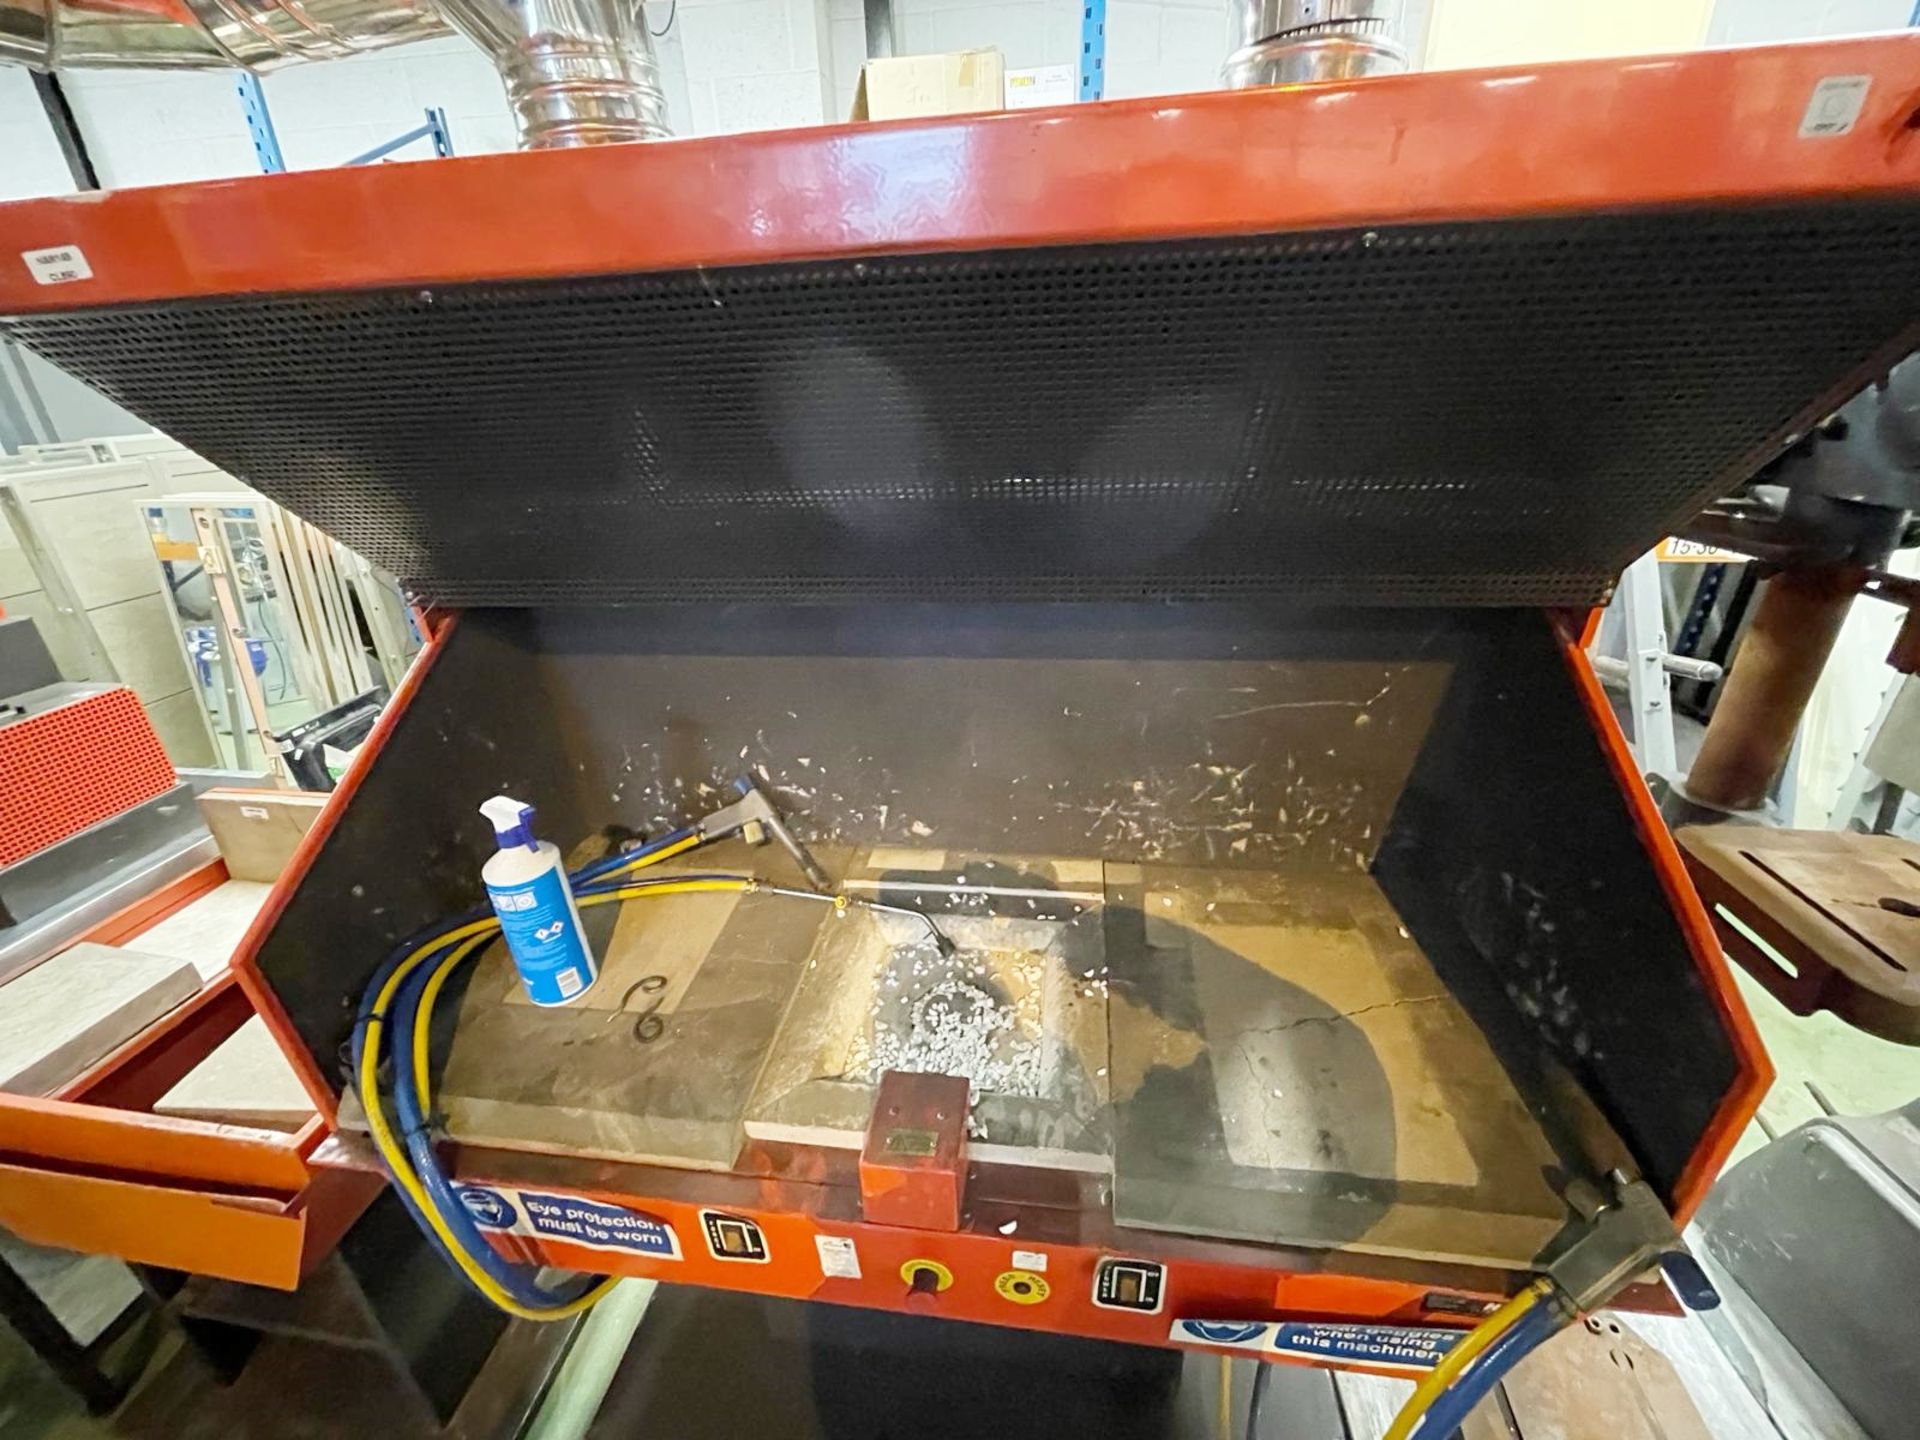 1 x Double Brazing Hearth and Alumina Chip Forge - Treatment Unit for Joining of Metal - RRP £7,800 - Image 3 of 12